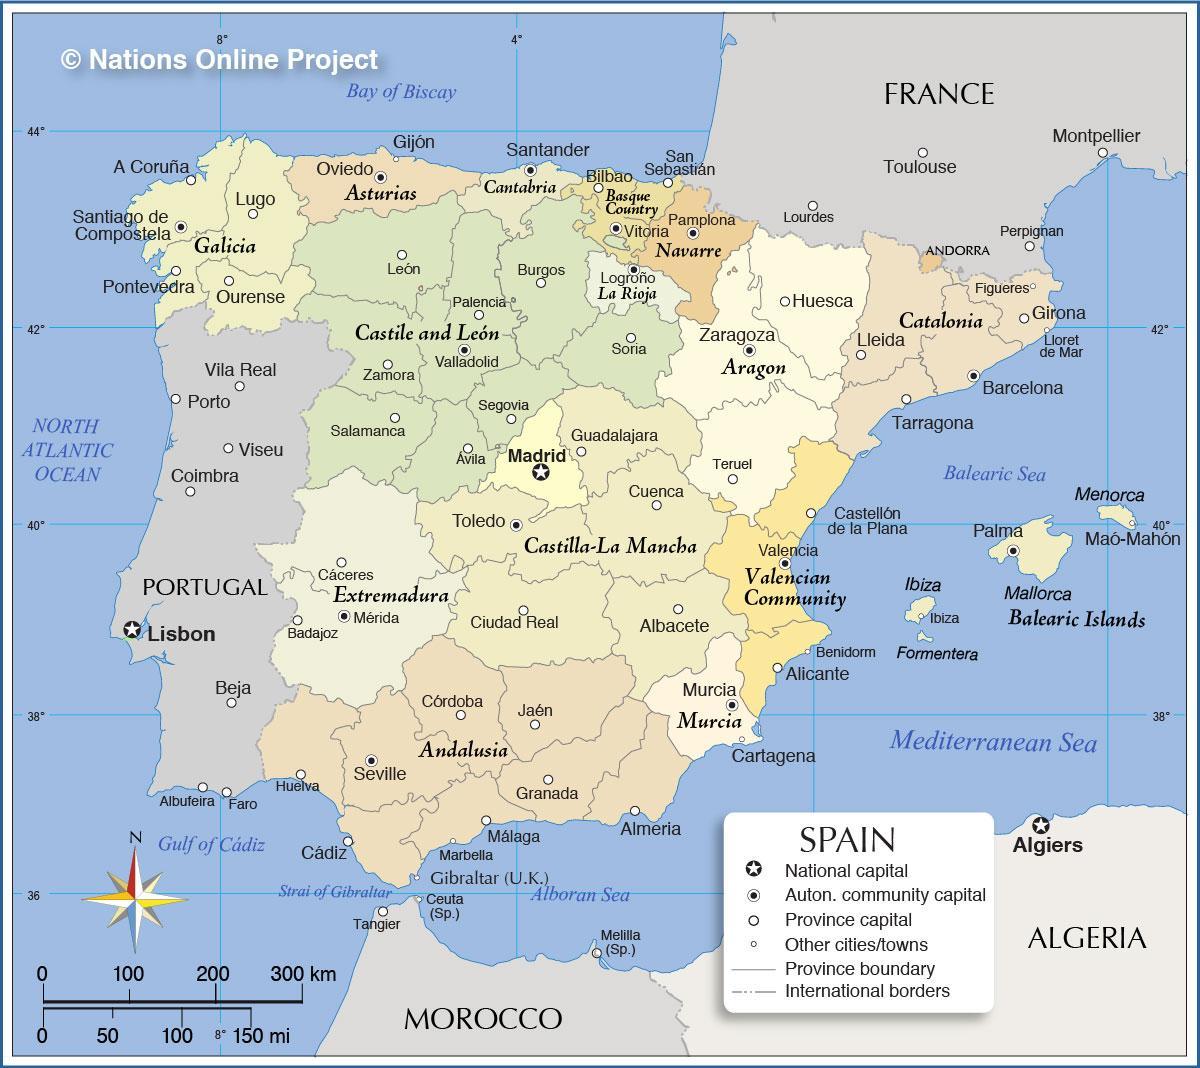 Spain in a map